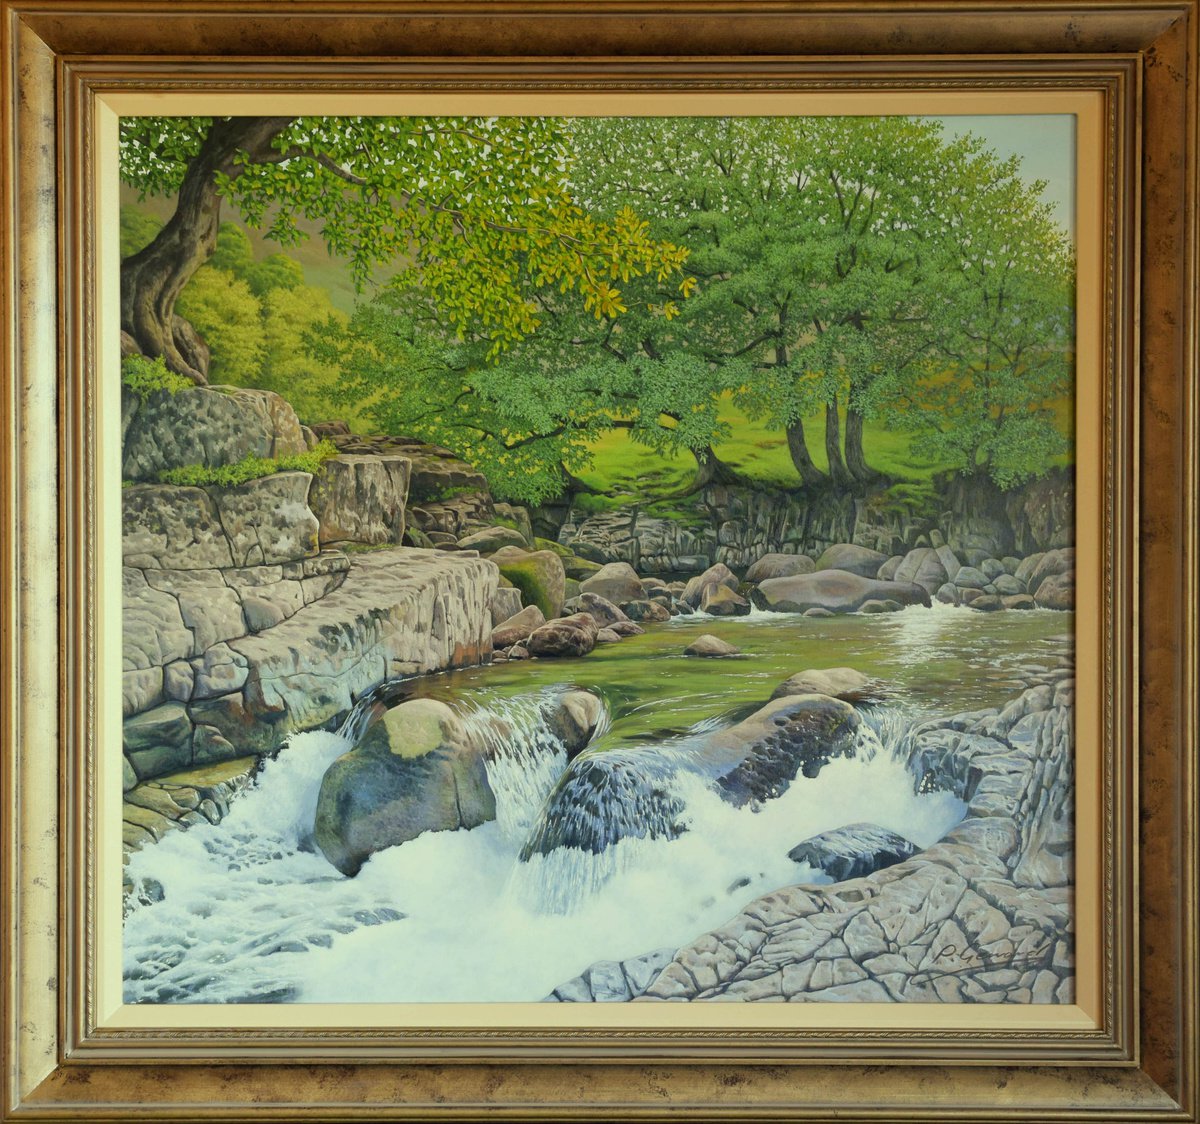 A SECRET PLACE Lake District waterfall landscape painting by Philip Gerrard